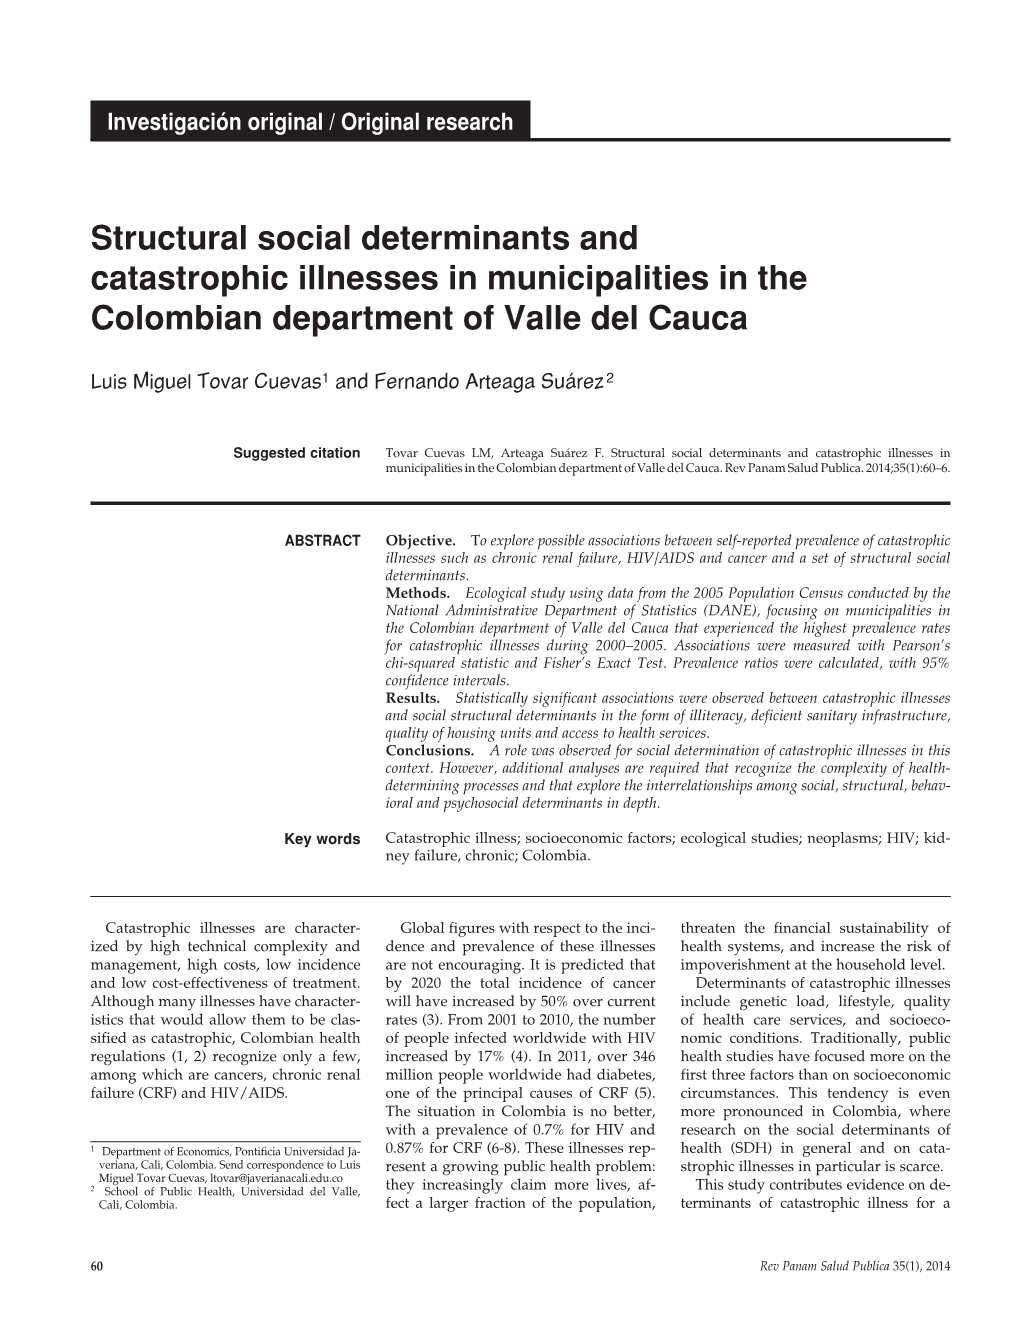 Structural Social Determinants and Catastrophic Illnesses in Municipalities in the Colombian Department of Valle Del Cauca